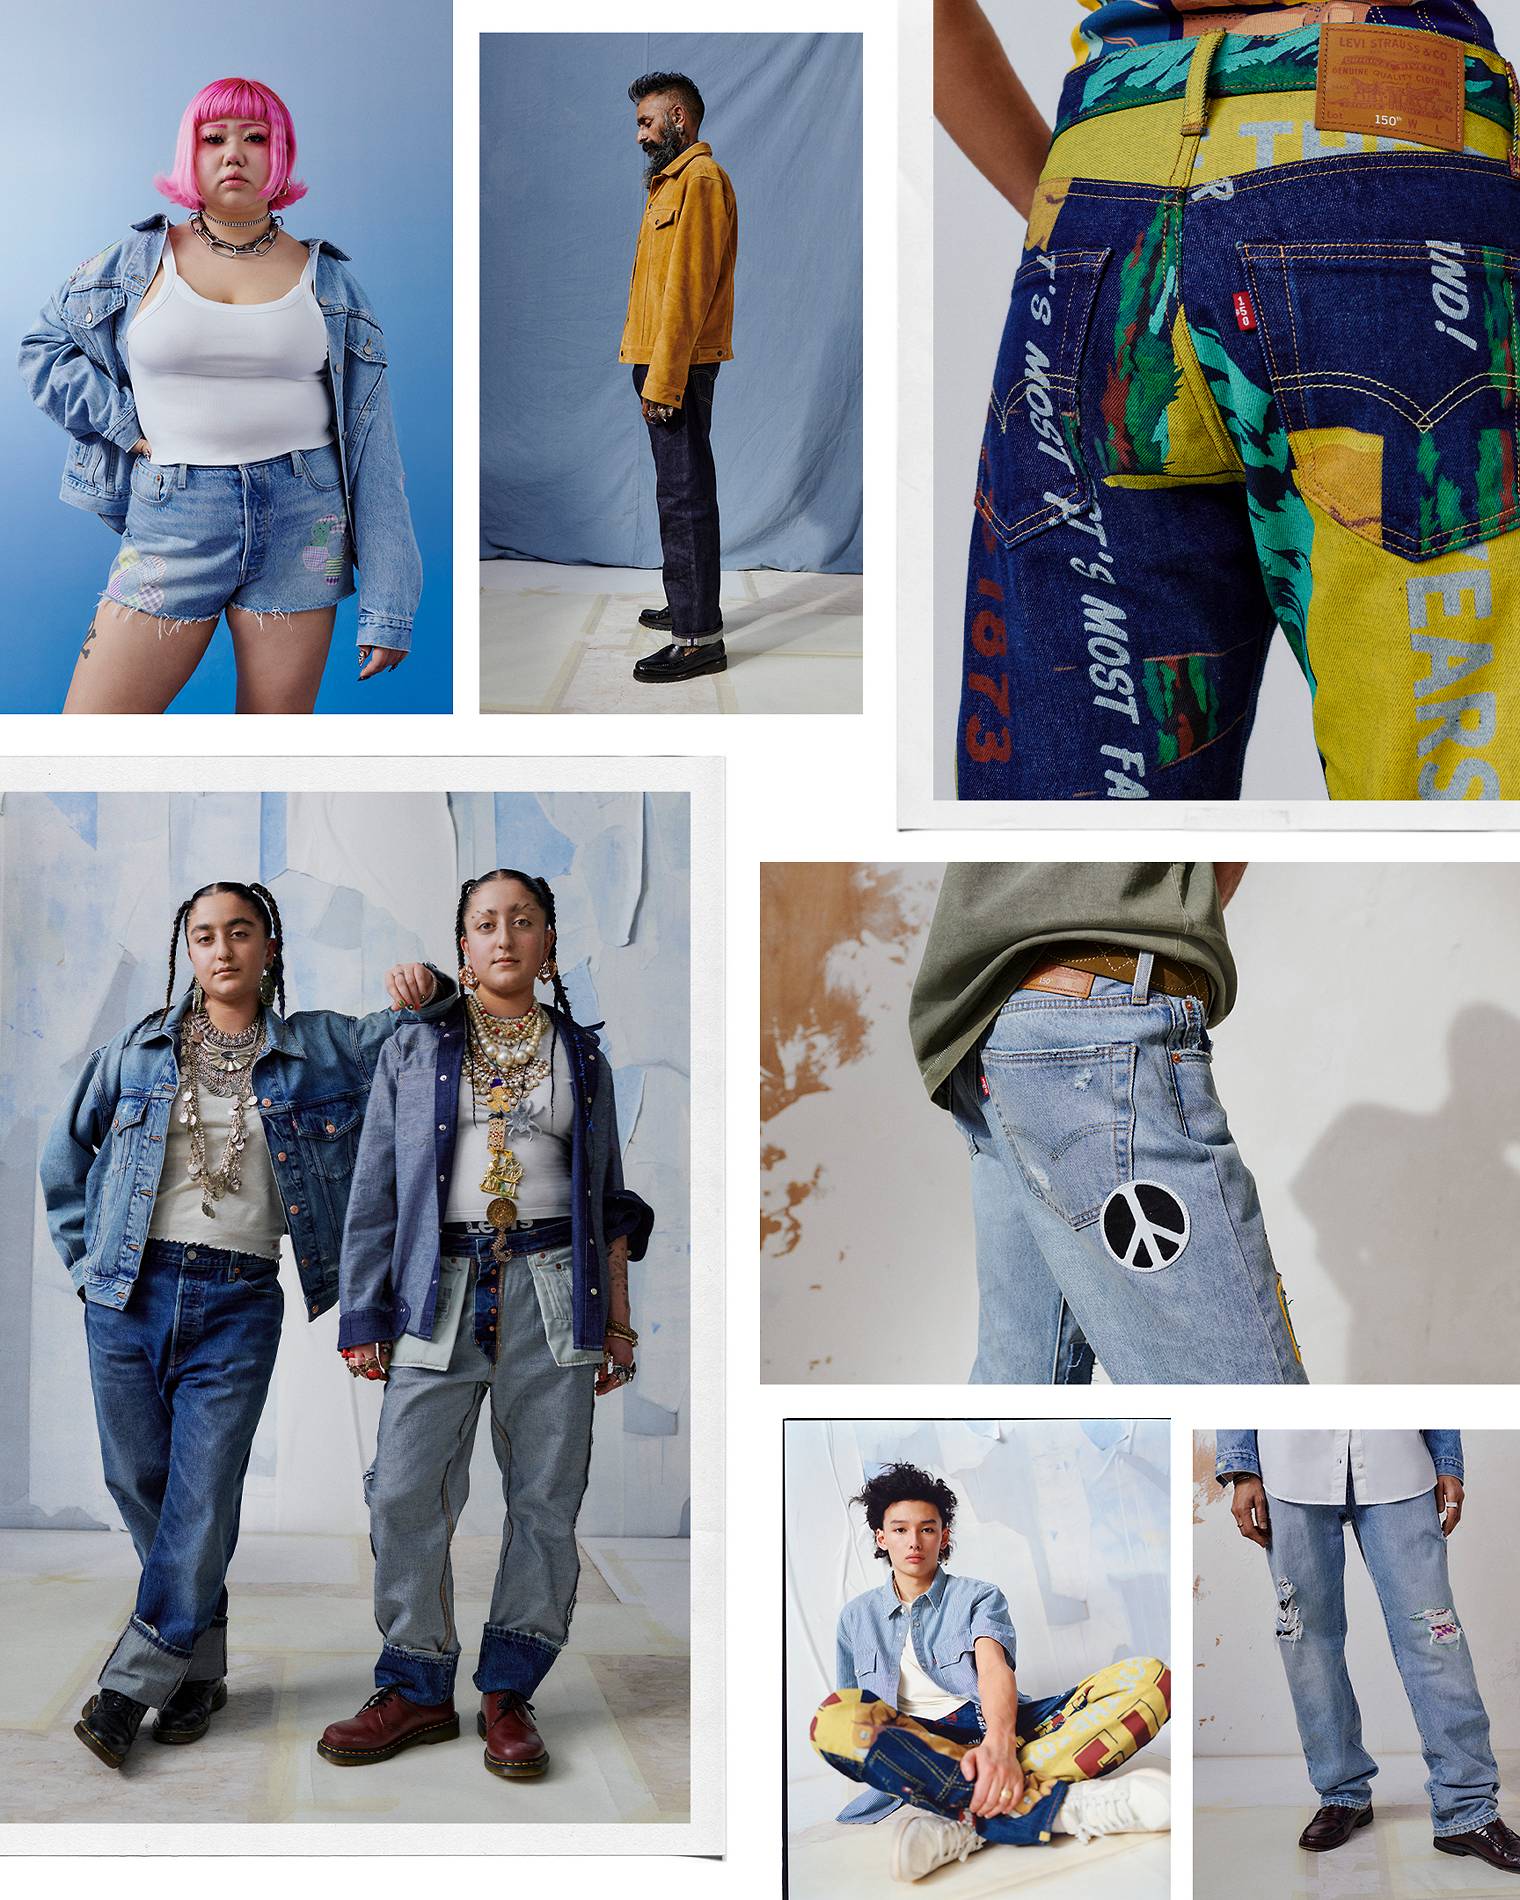 Denim Insiders Explains the Enduring Appeal of the Levi's 501 Jean